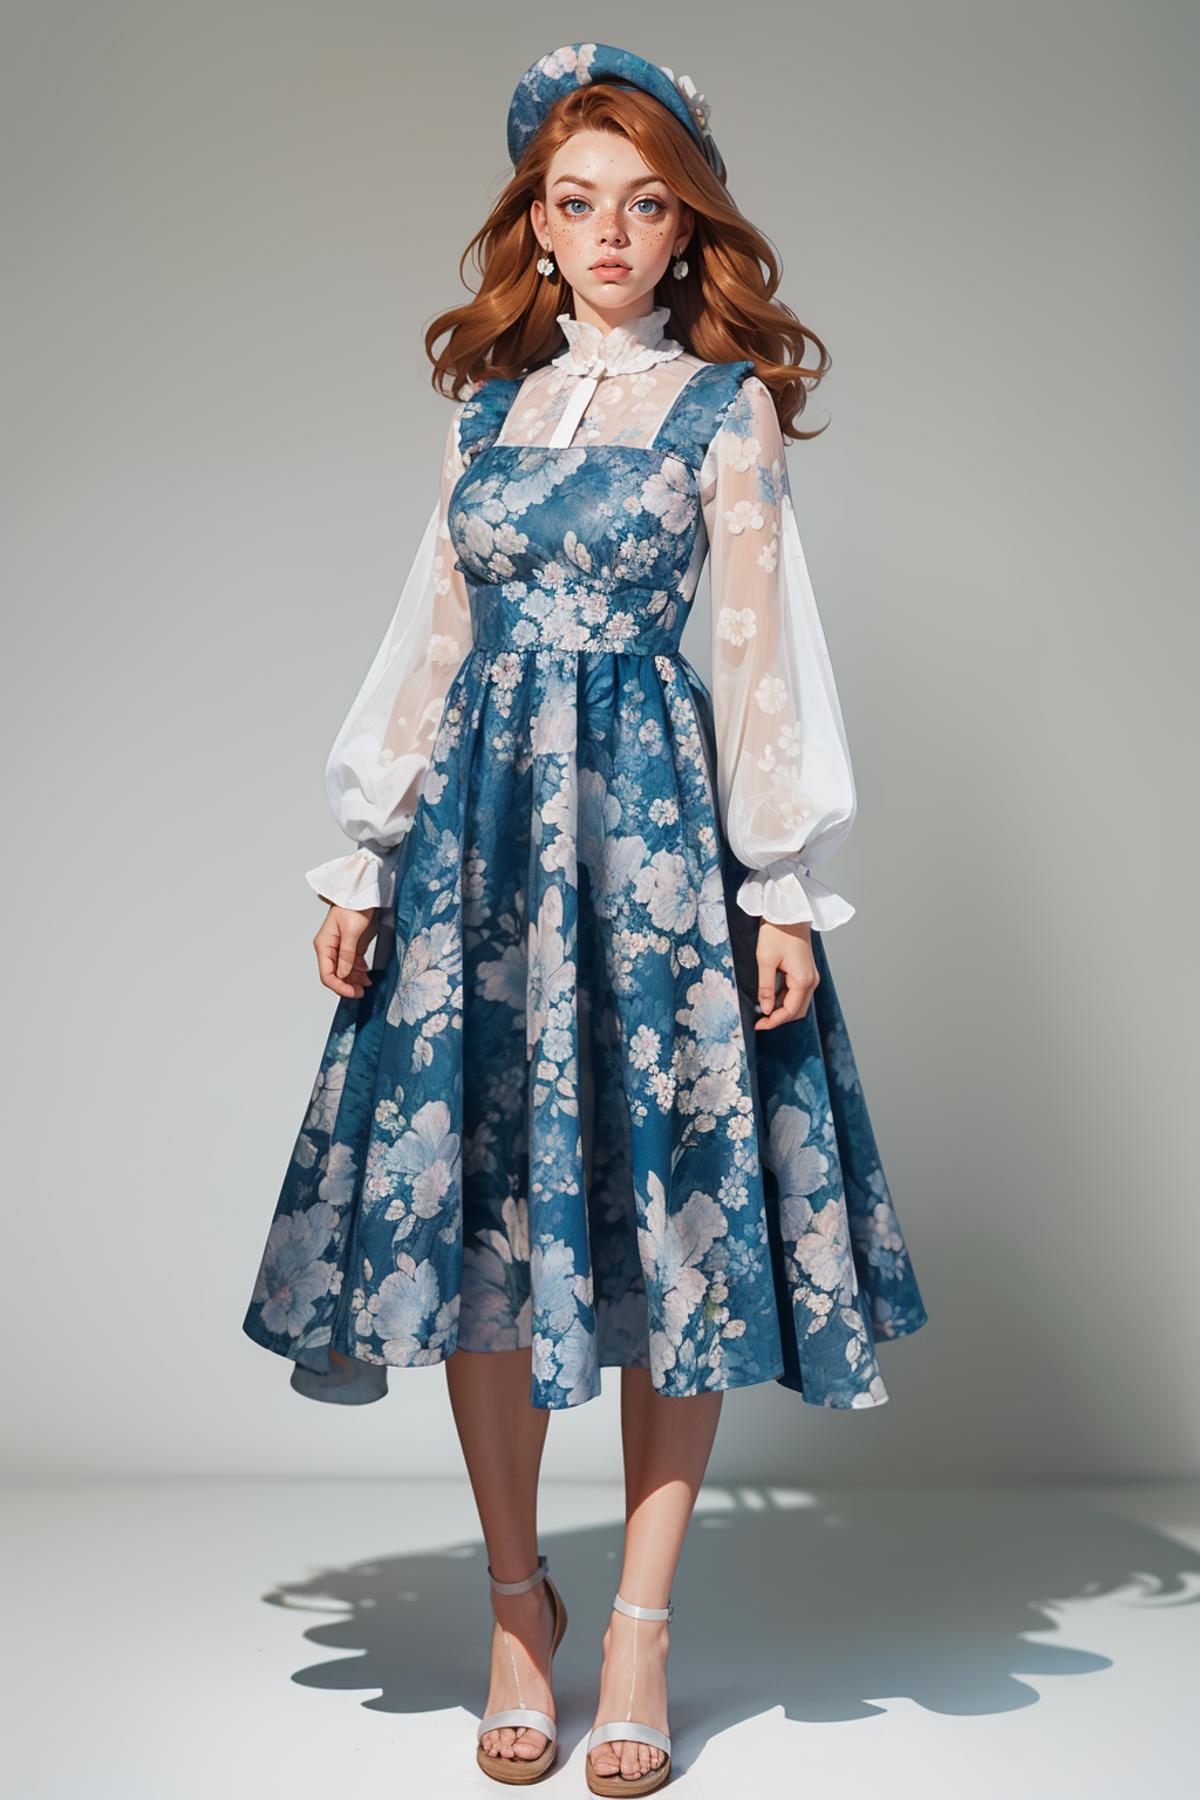 Blue Floral with Long Puffy Sleeves image by freckledvixon